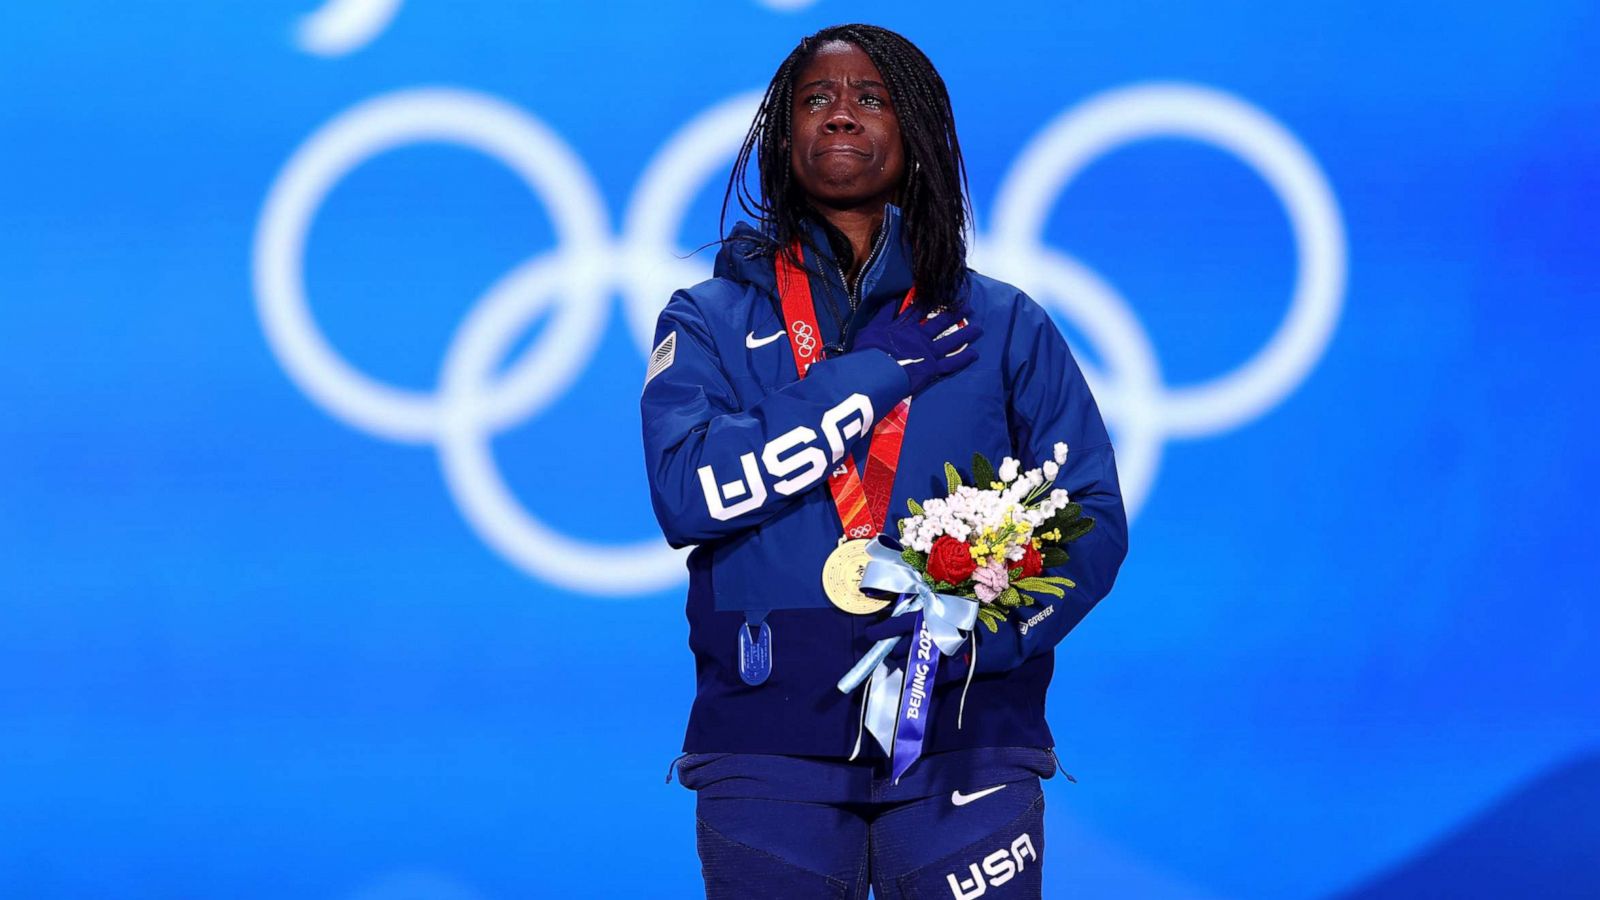 PHOTO: Gold medal-winning speed skater Erin Jackson of Team United States reacts during the Women's 500m medal ceremony on Day 10 of the 2022 Winter Olympics at Medal Plaza, in Beijing, Feb. 14, 2022.